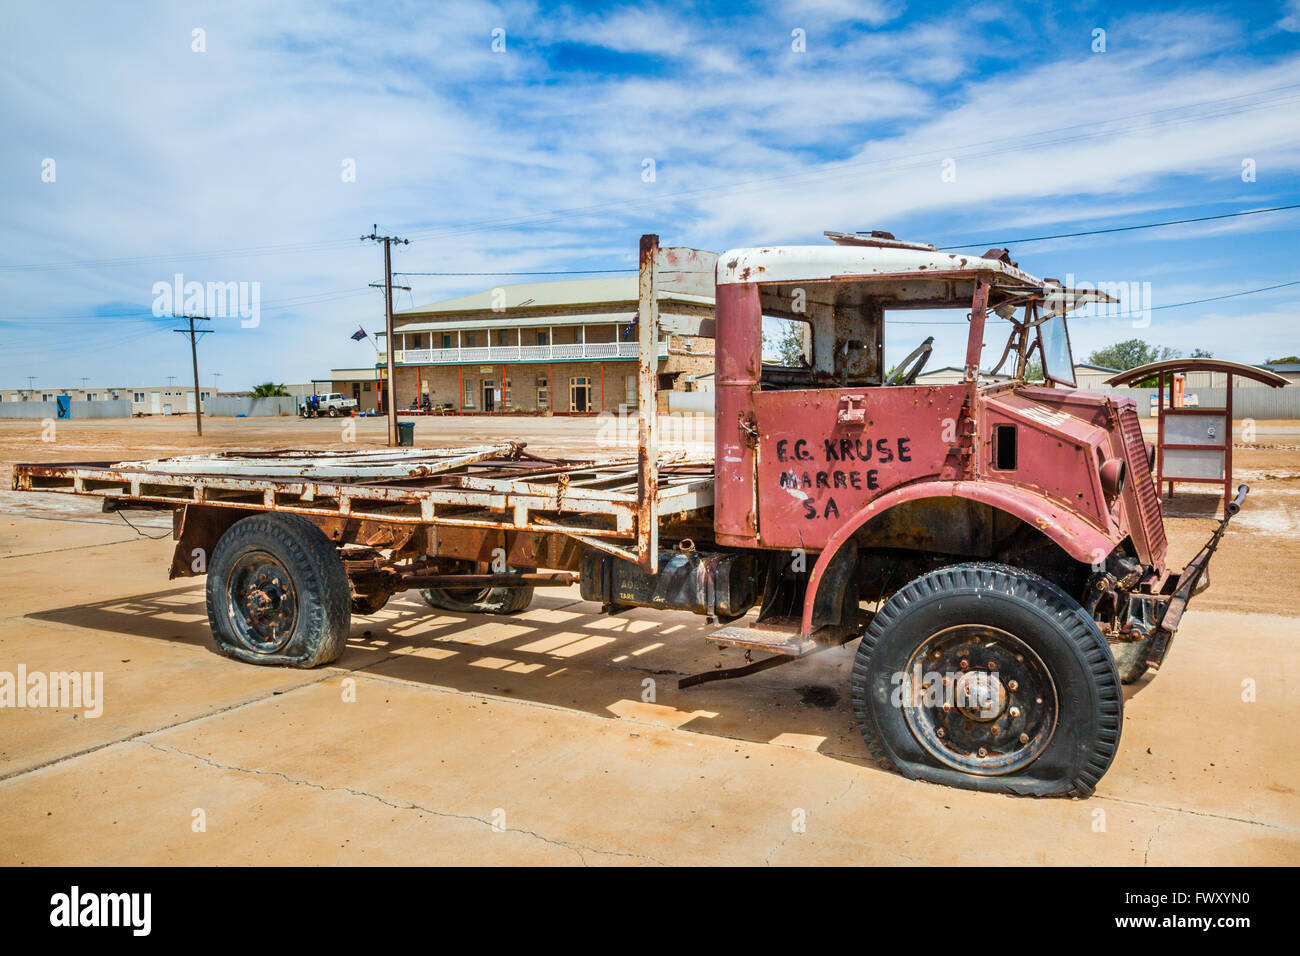 Marree in South Australia, Marree Hotel, vintage 1940s Chevrolet Blitz truck as it was used by Tom Kruse, the outback mailman Stock Photo